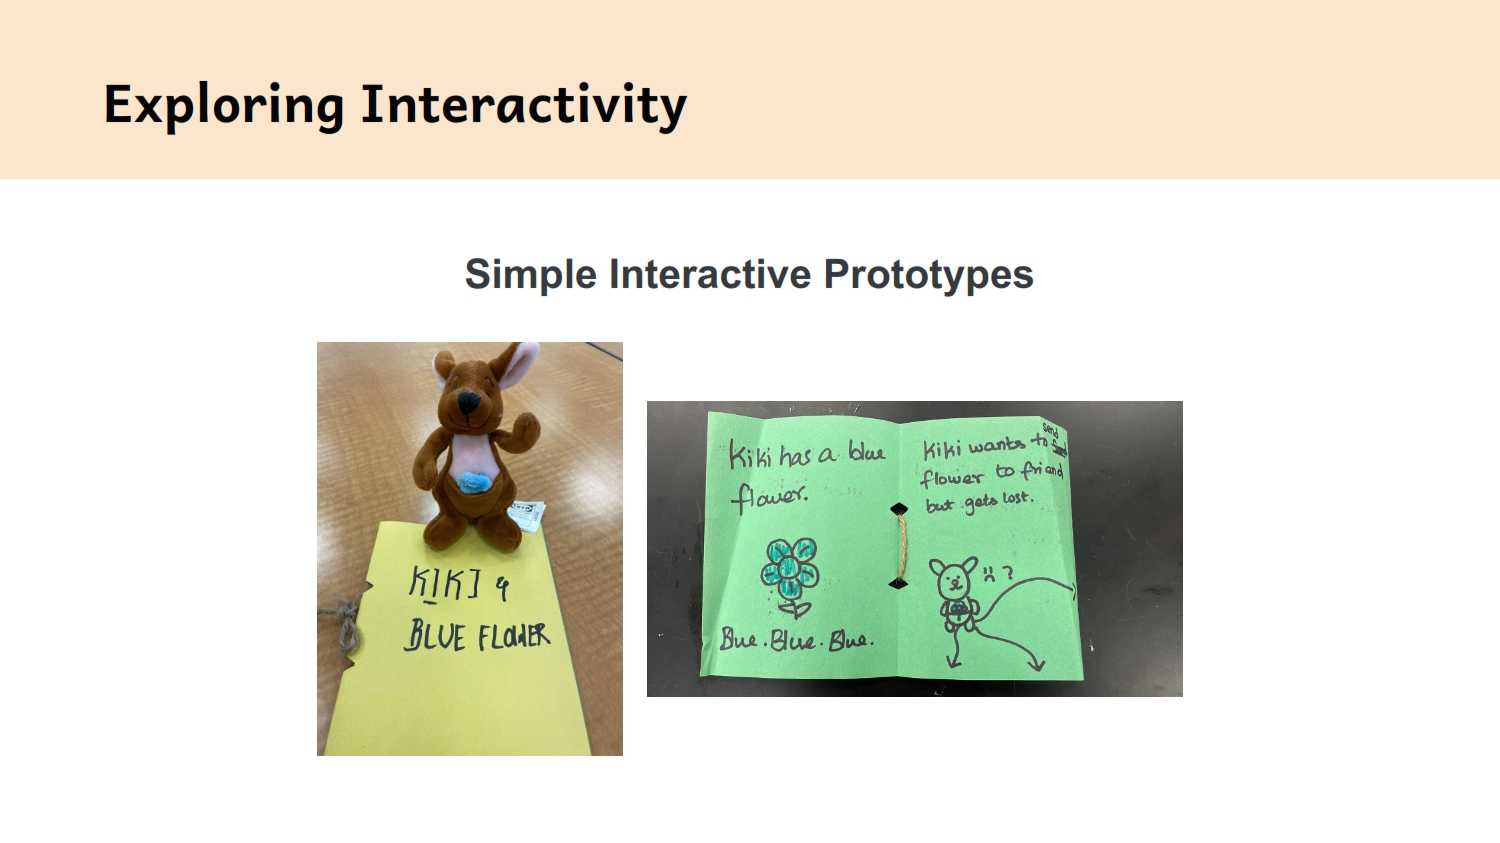 Exploring interactivity with simple prototypes